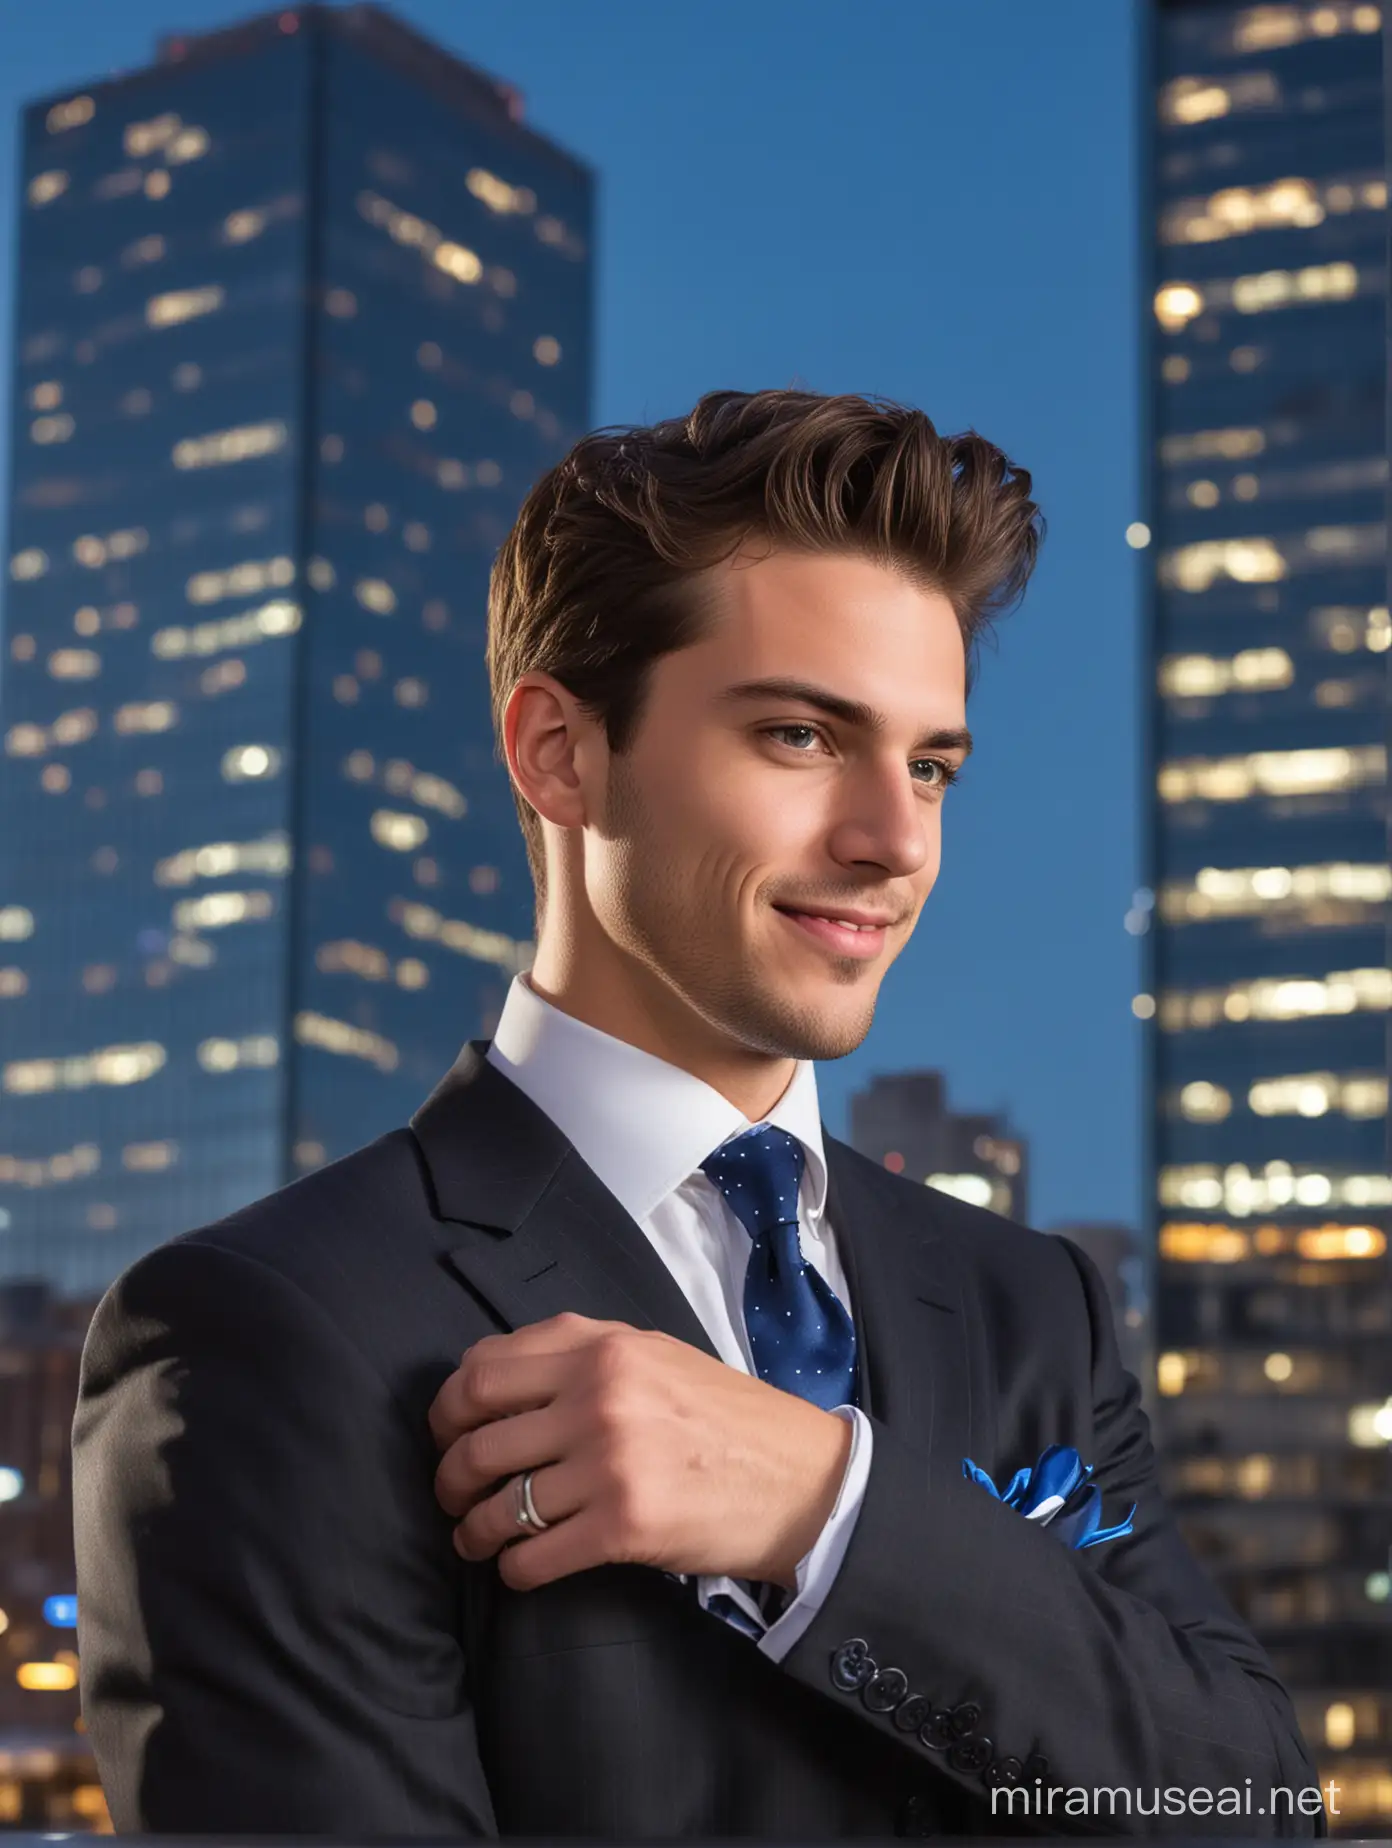 Confident Young Man Adjusting Cufflinks with City Skyline Background